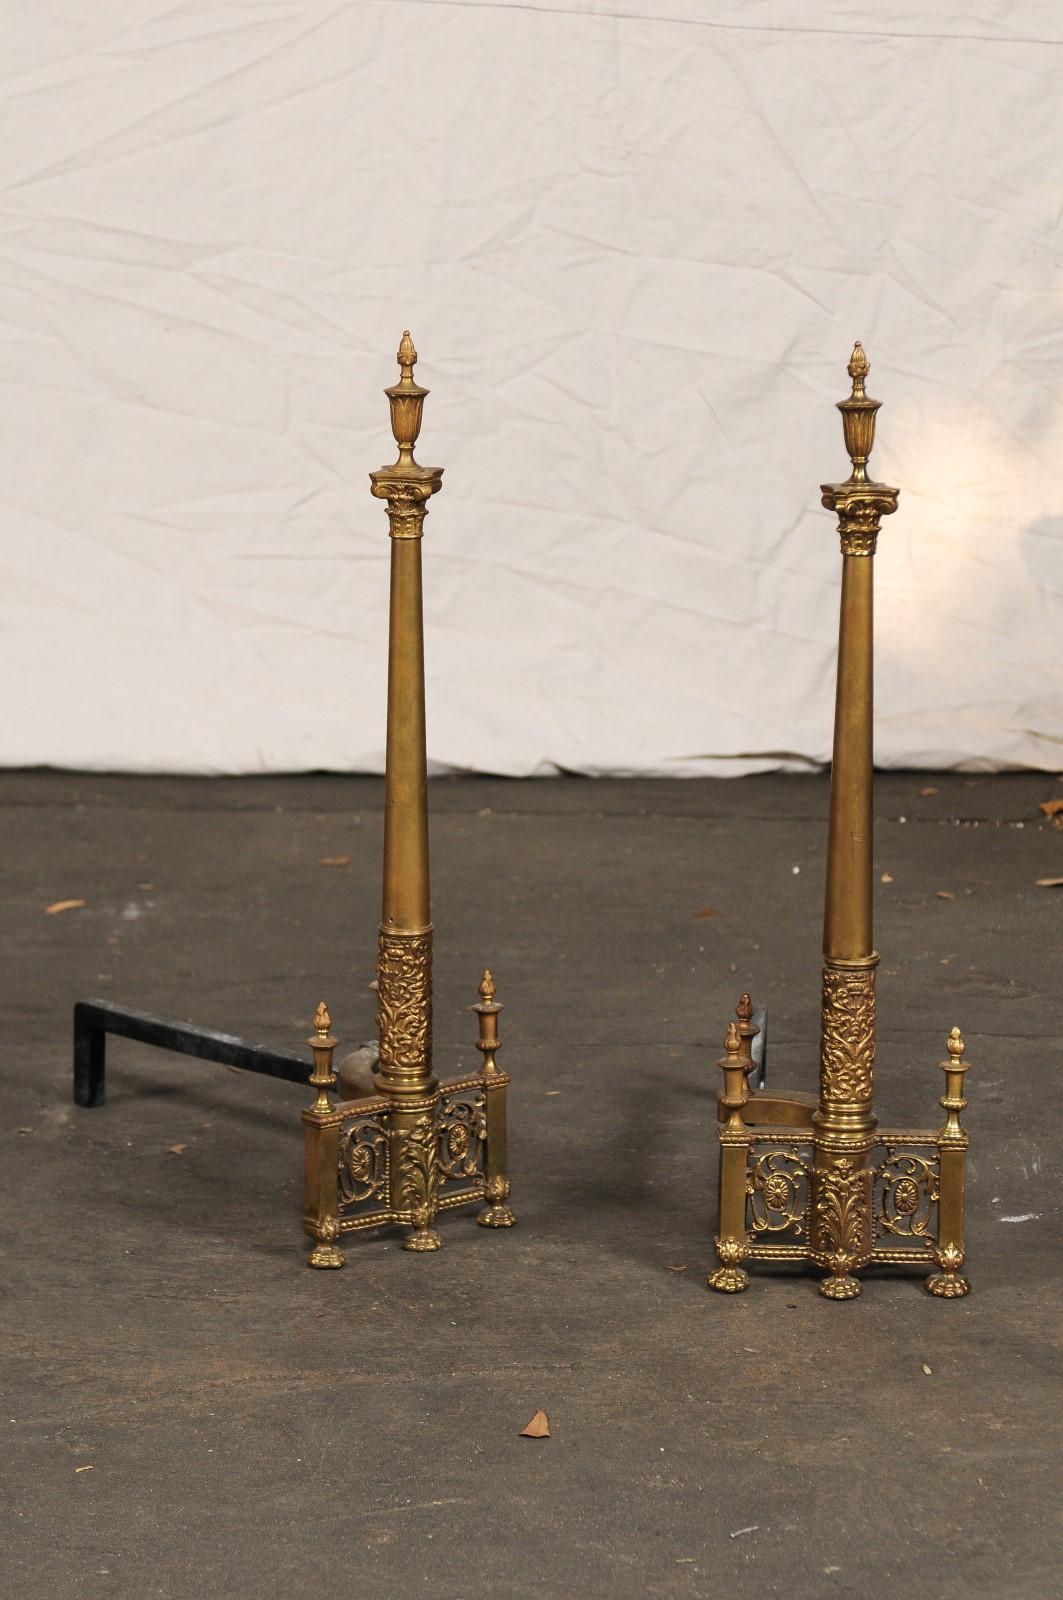 19th-20th century neoclassical brass andirons, columns with flaming urns, paw feet
Great detail.